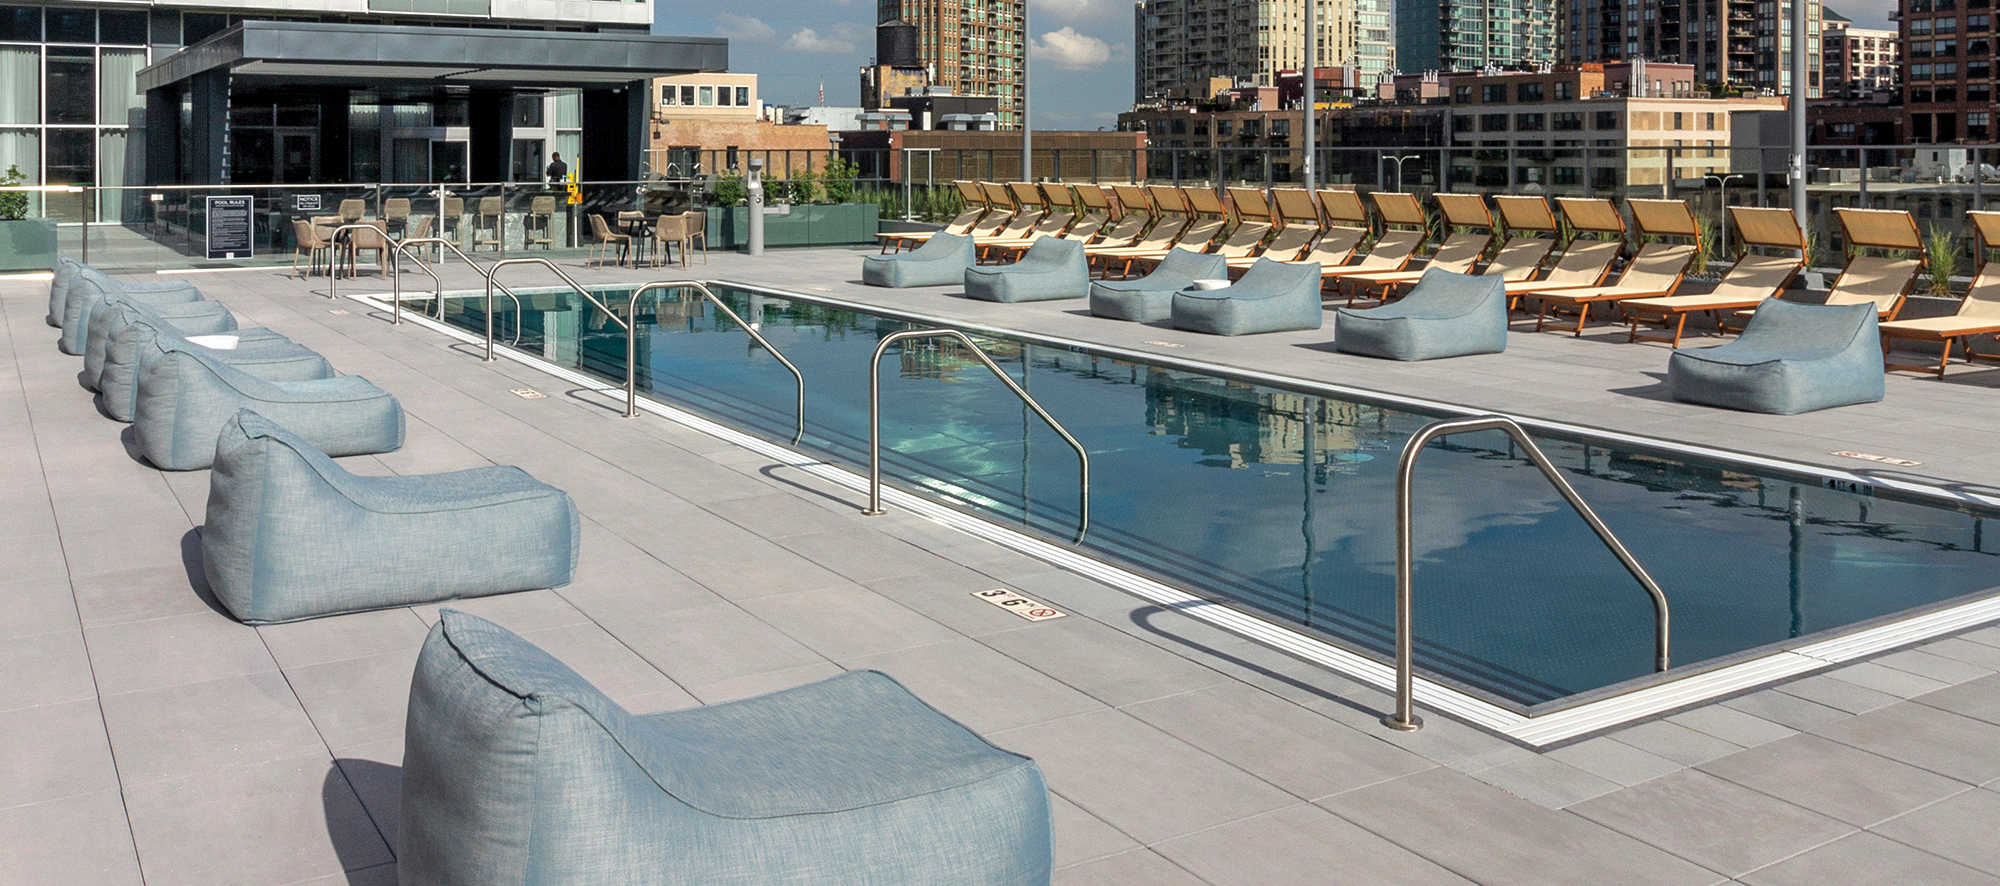 Parallel to the Chicago skyline, this roof deck features a pool, lounge chairs, and large square Unilock slabs in the color opal.